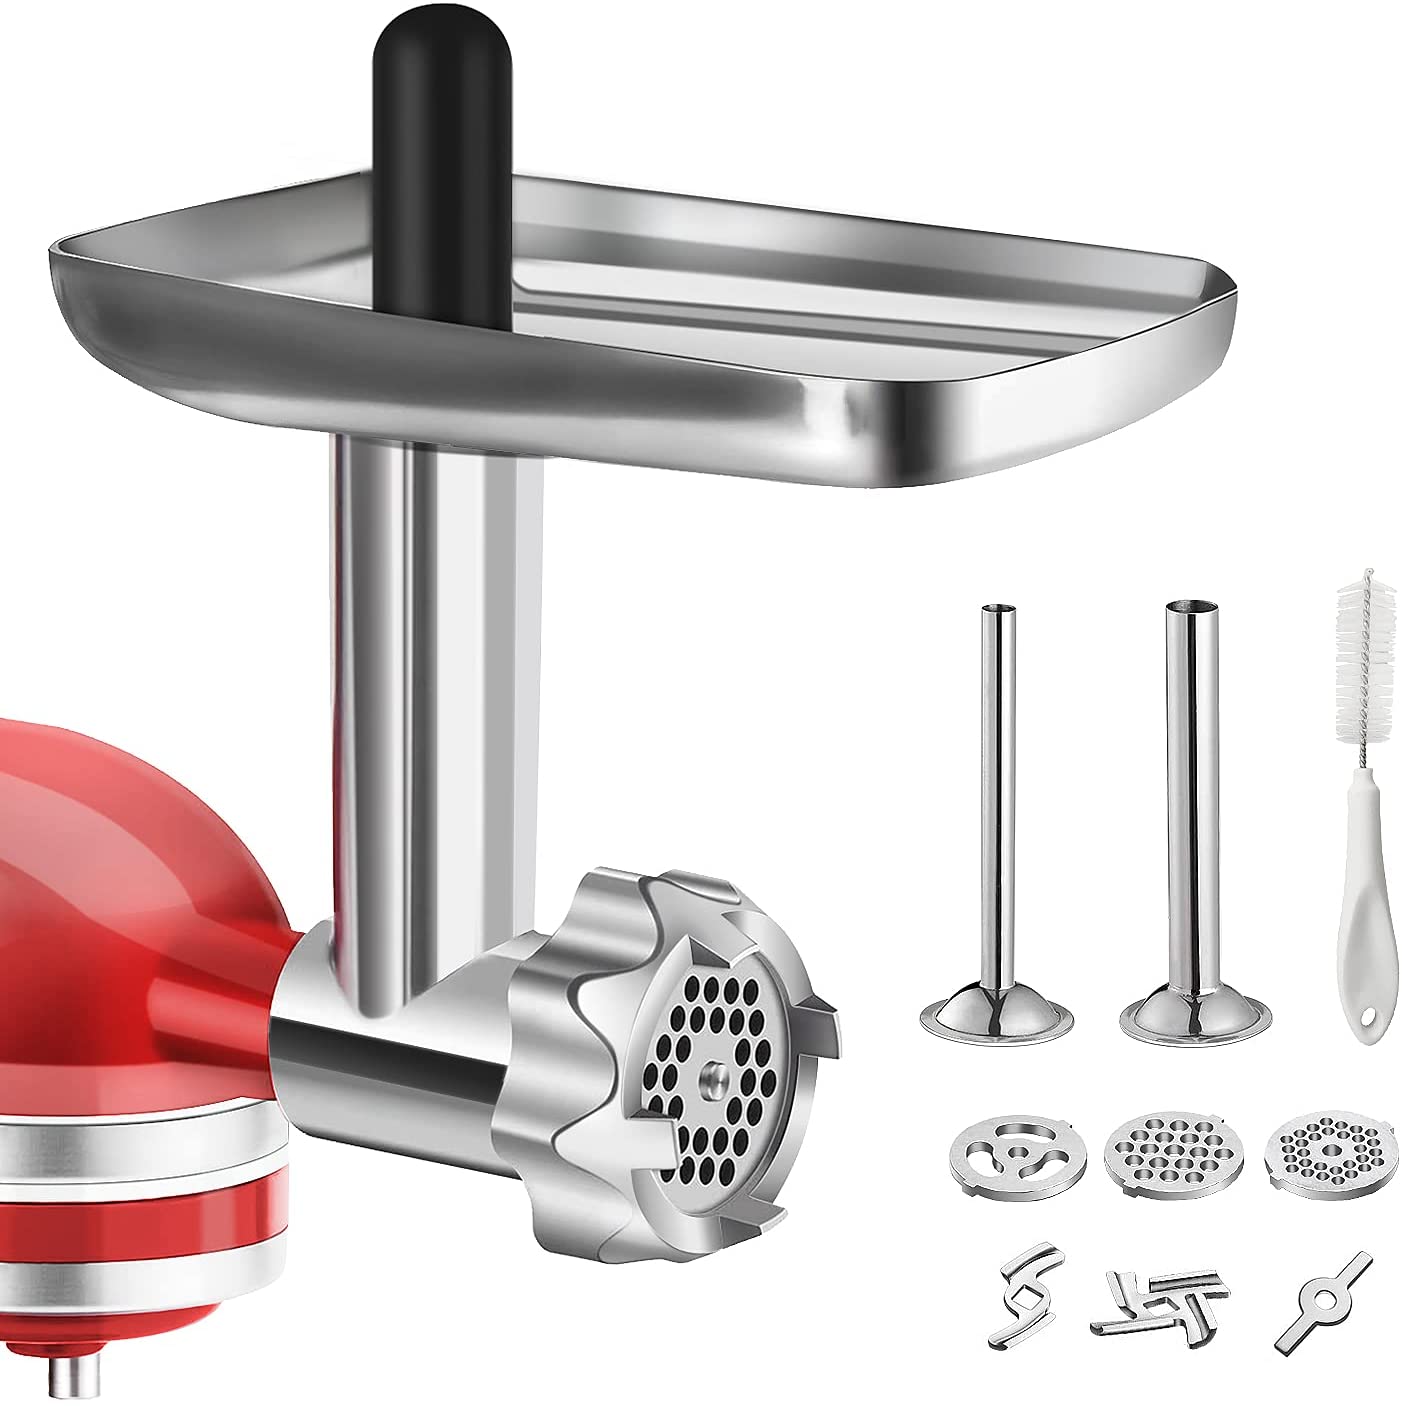 Bqypower Metal Meat Grinder Attachment for KitchenAid Stand Mixer with 2 Sausage Filling Pipes, 3 Crushing Blades, 3 Chopping Plates